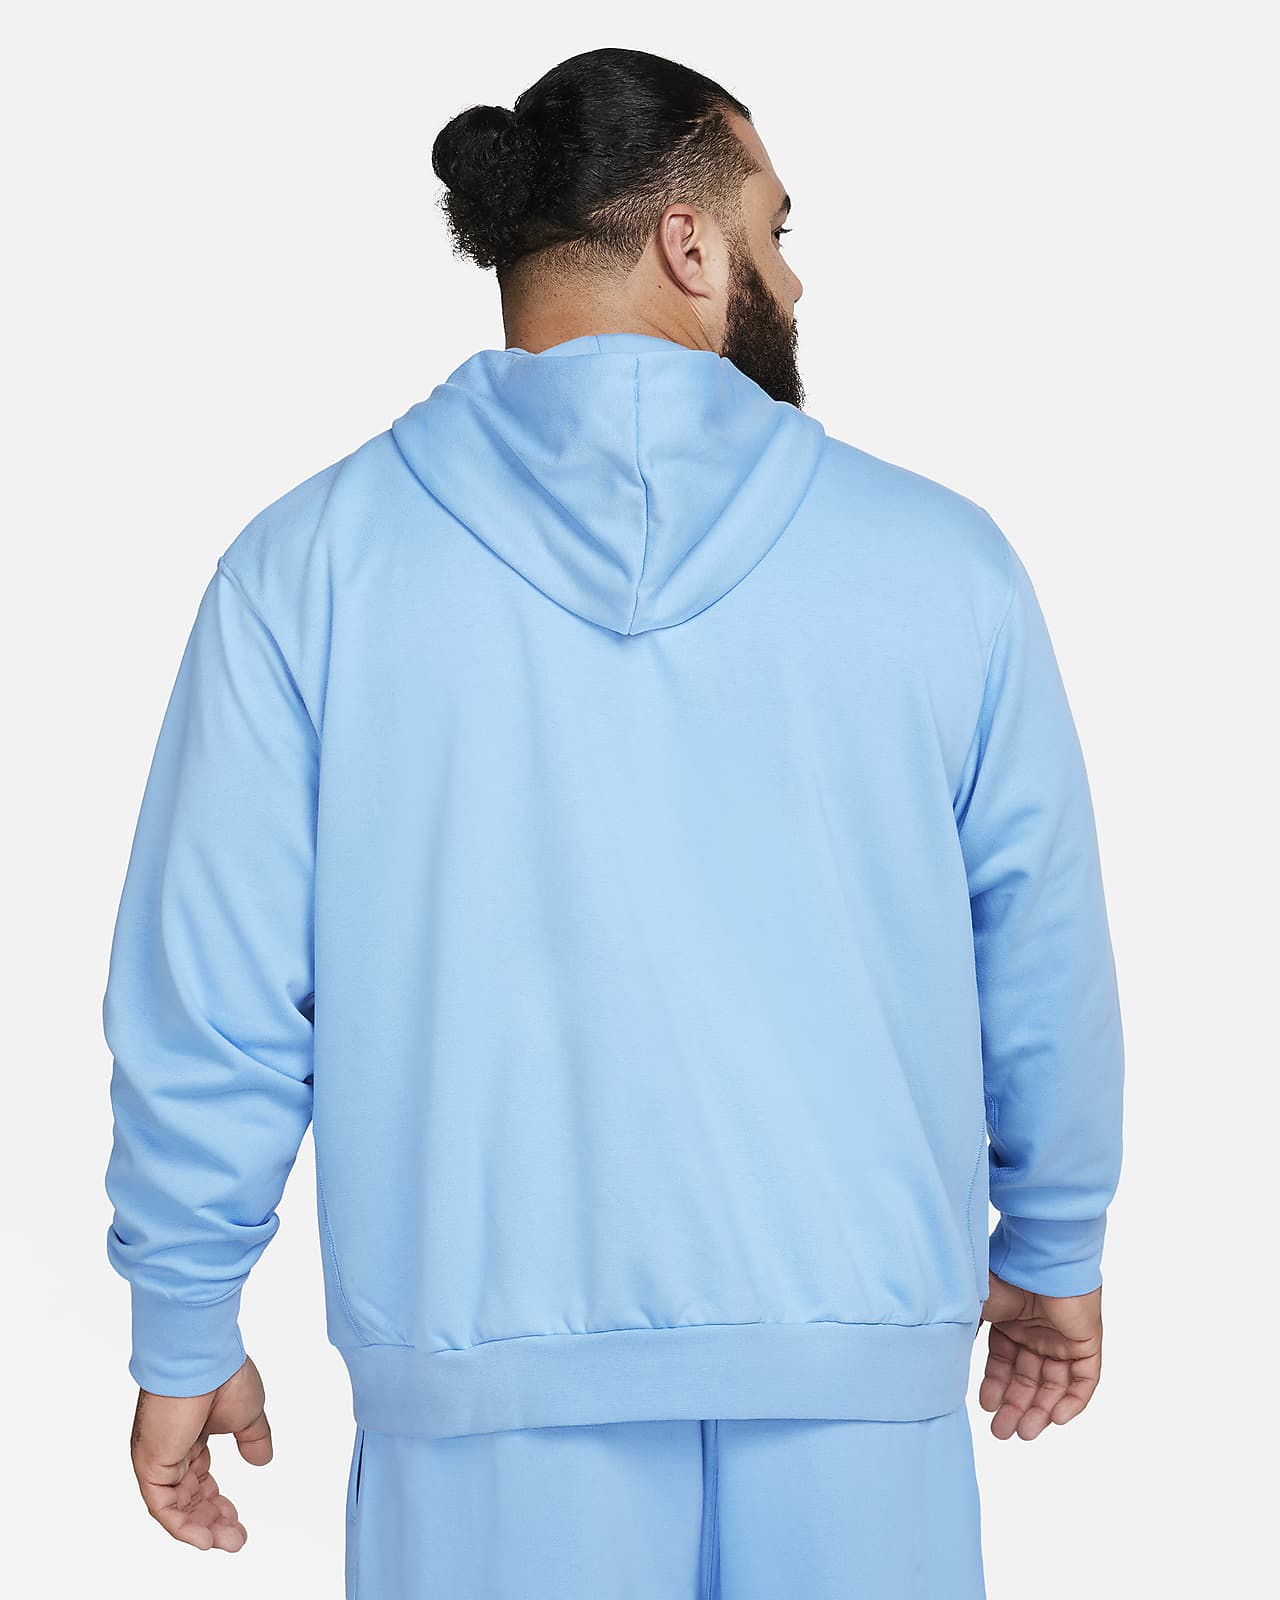 Nike Men's Standard Issue Dri-FIT Pullover Basketball Hoodie in